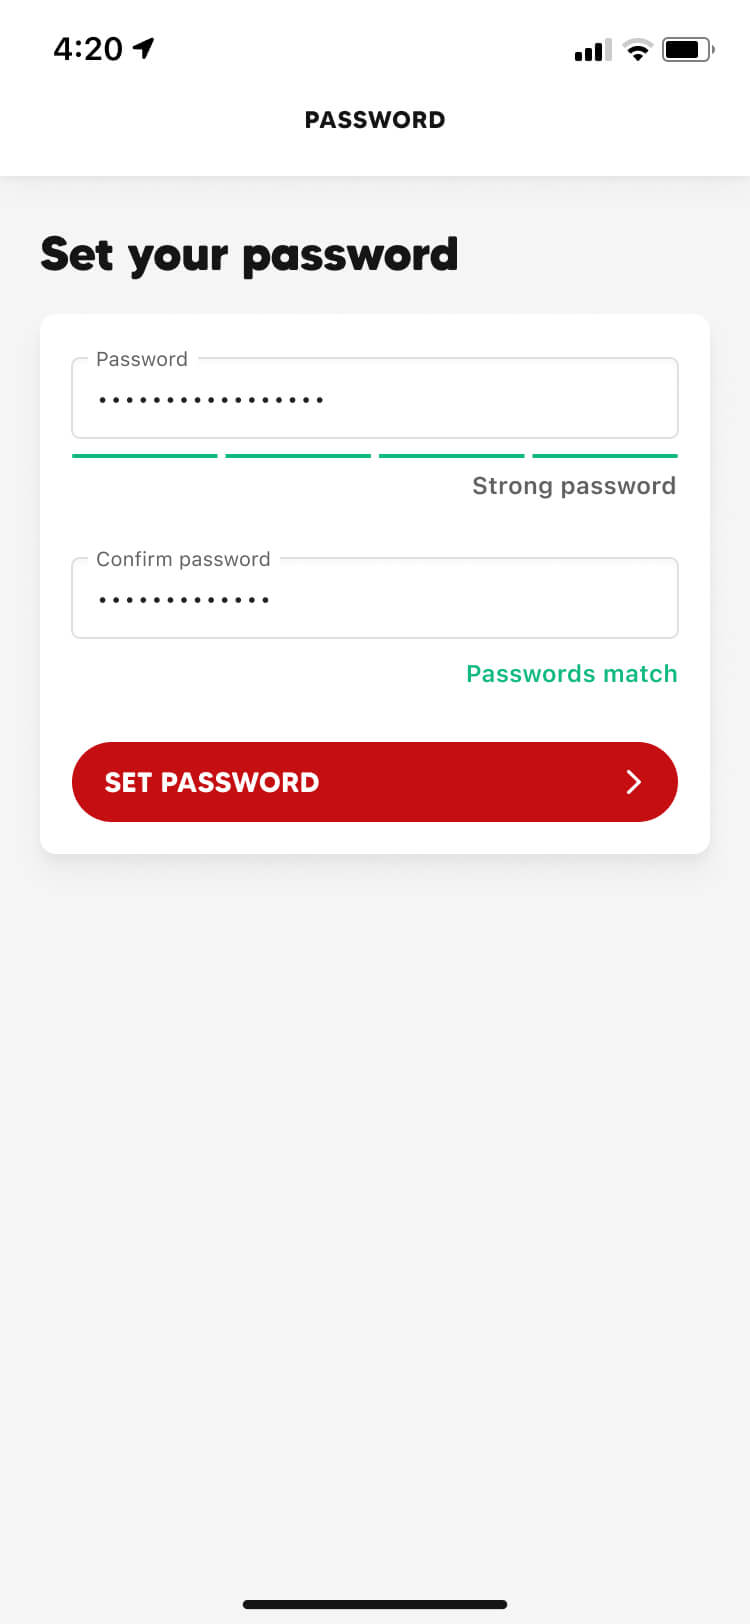 Set your password screenshot of the Collect mobile app